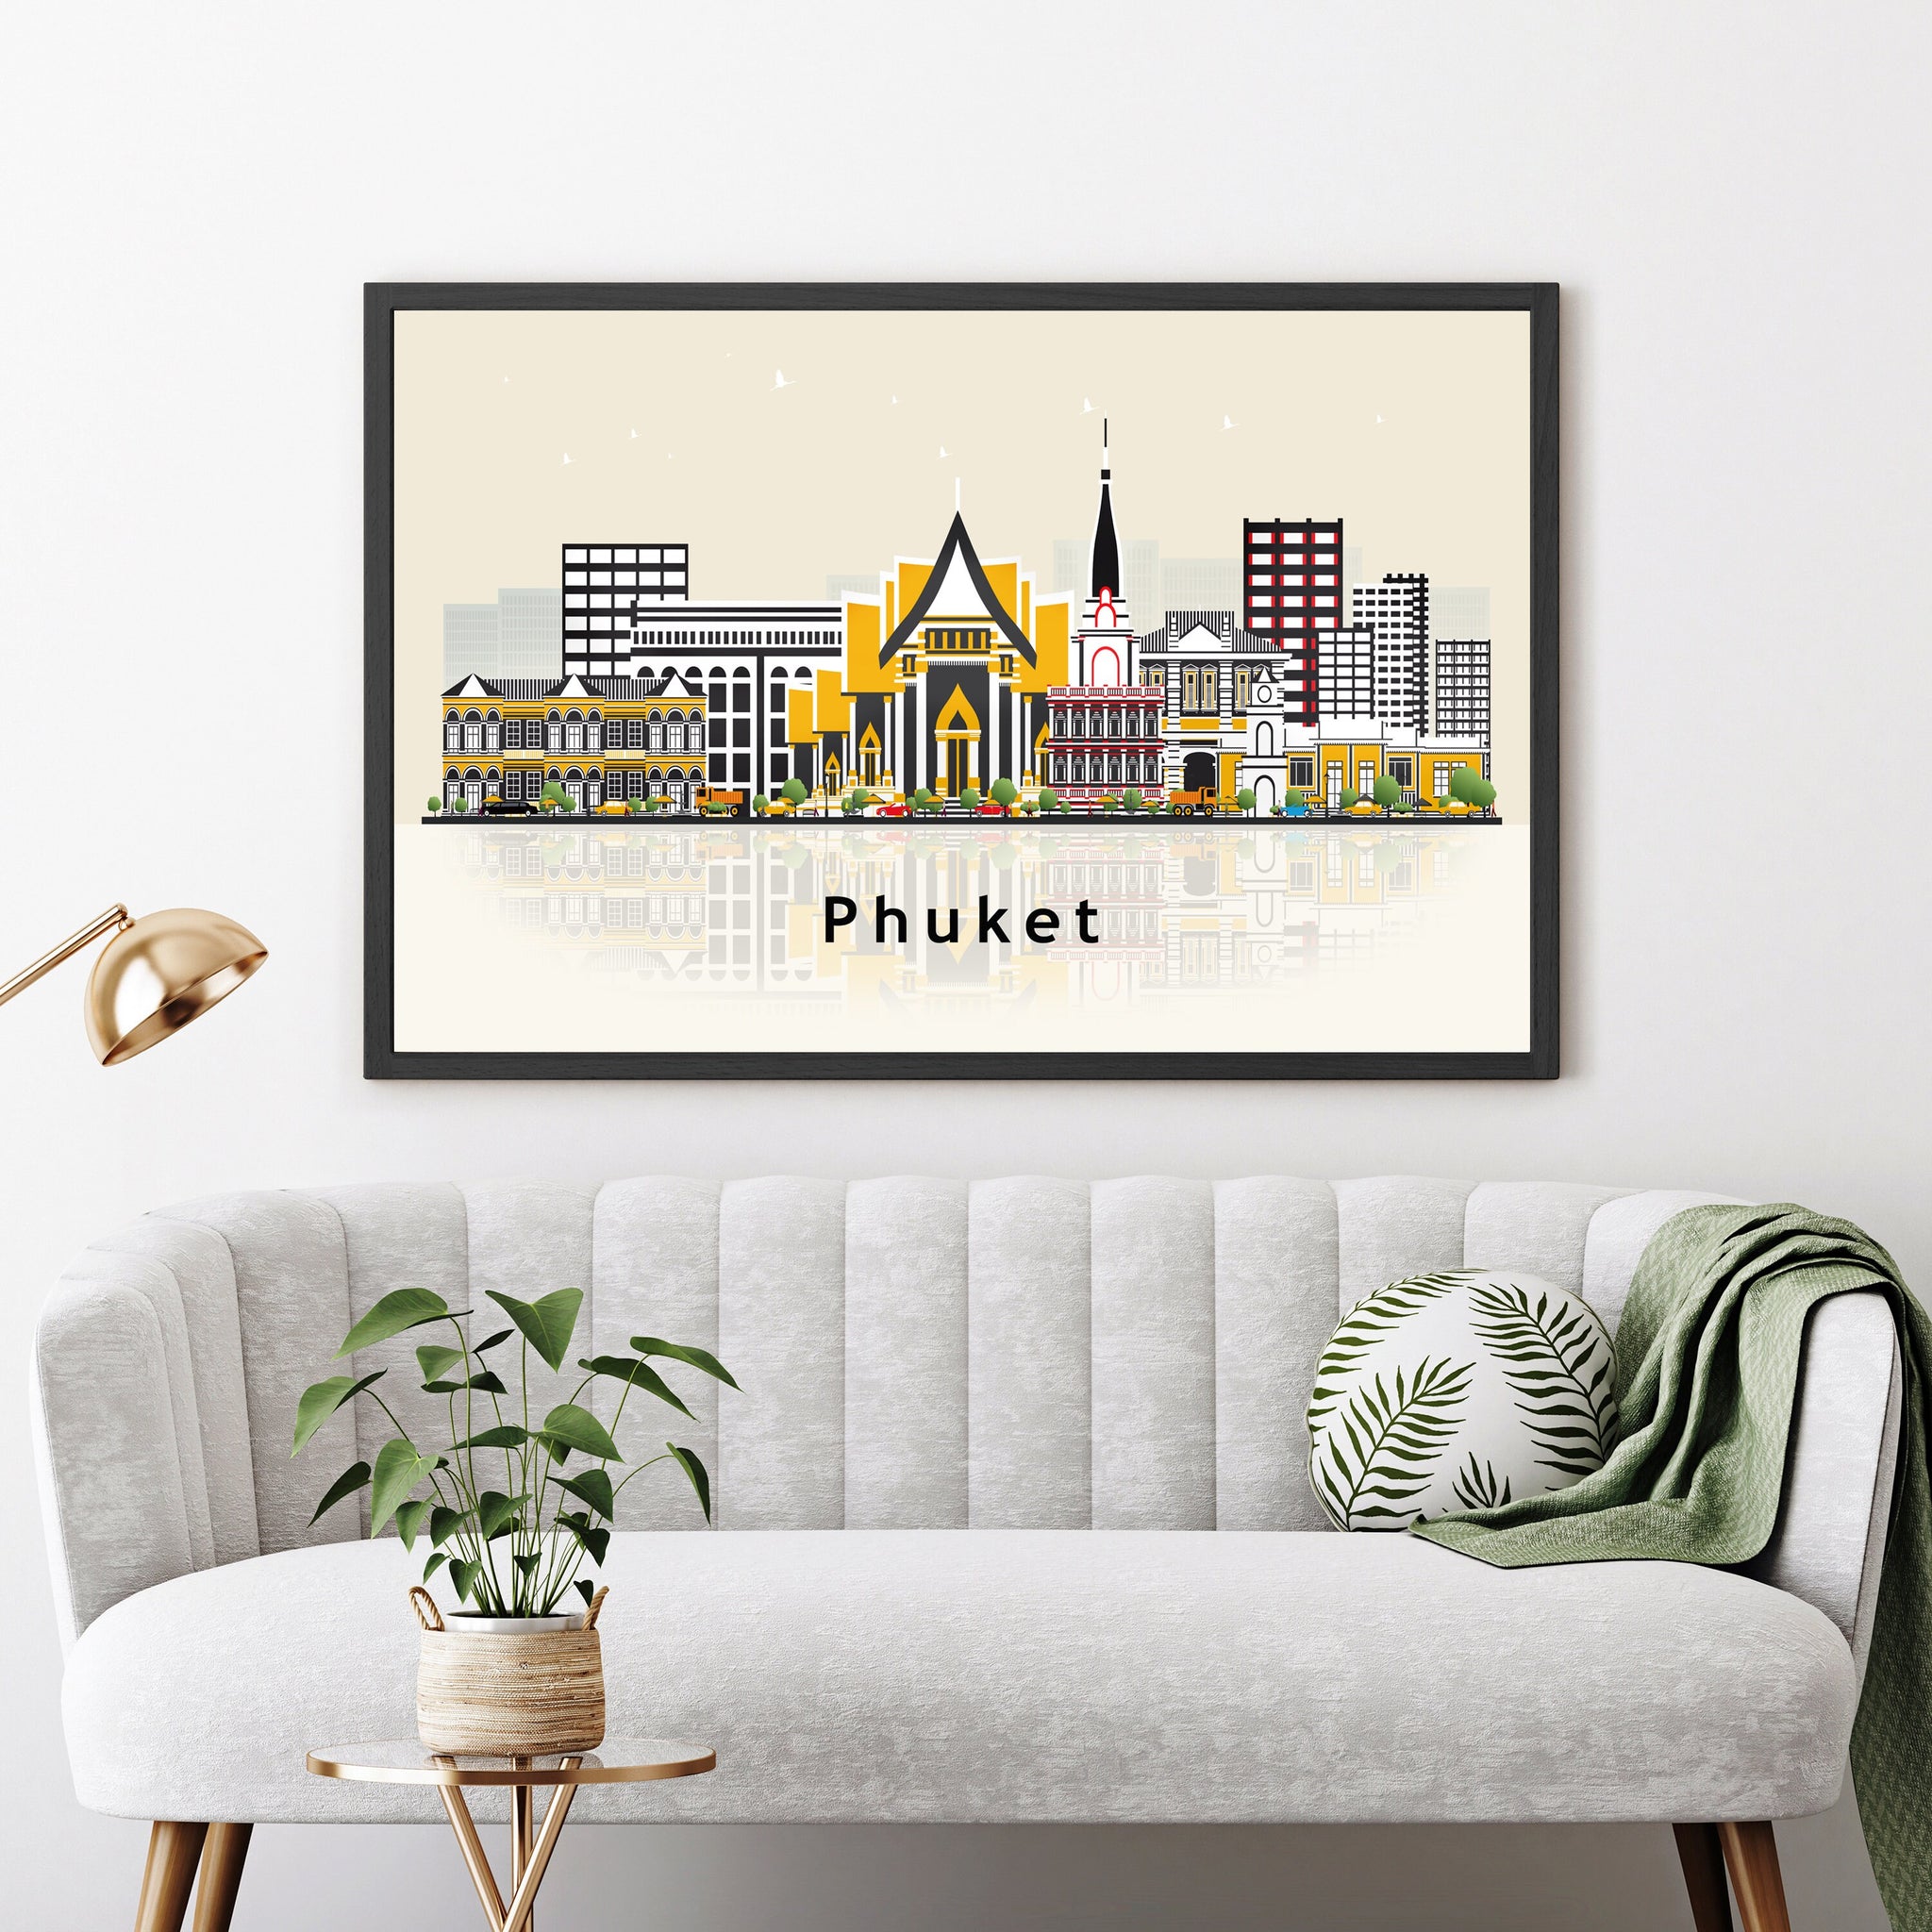 PHUKET THAILAND Illustration skyline poster, Modern skyline cityscape poster, City skyline landmark map poster, Home wall decorations